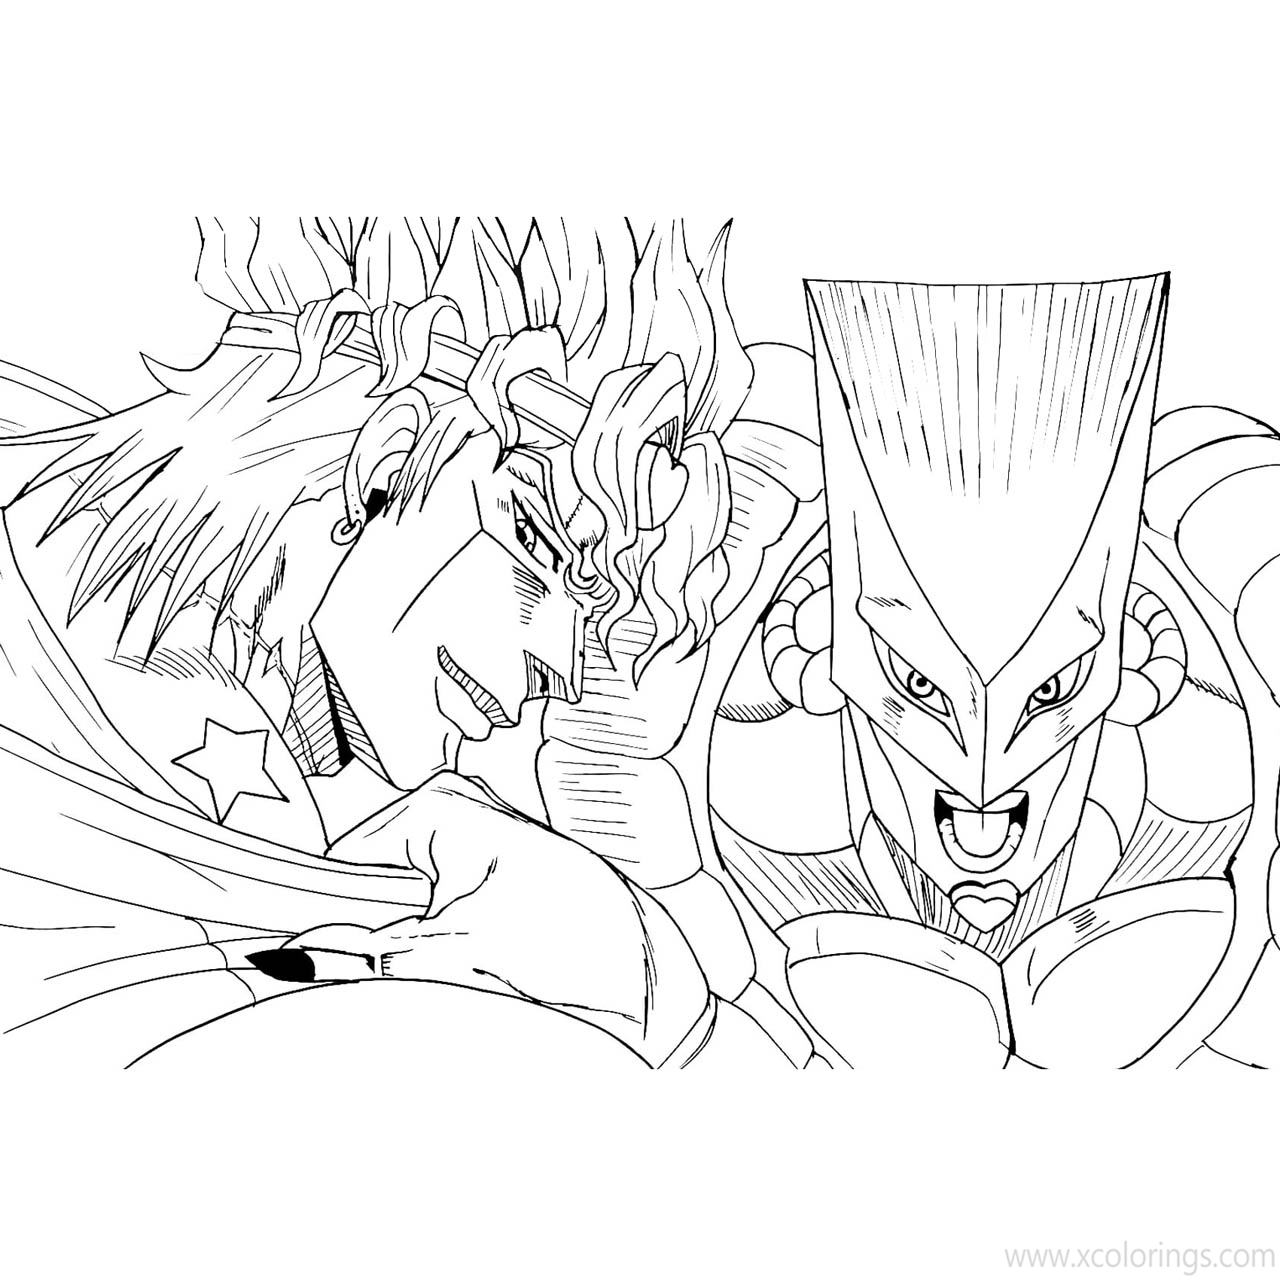 Free JoJo's Bizarre Adventure Coloring Pages Dio and Mir printable